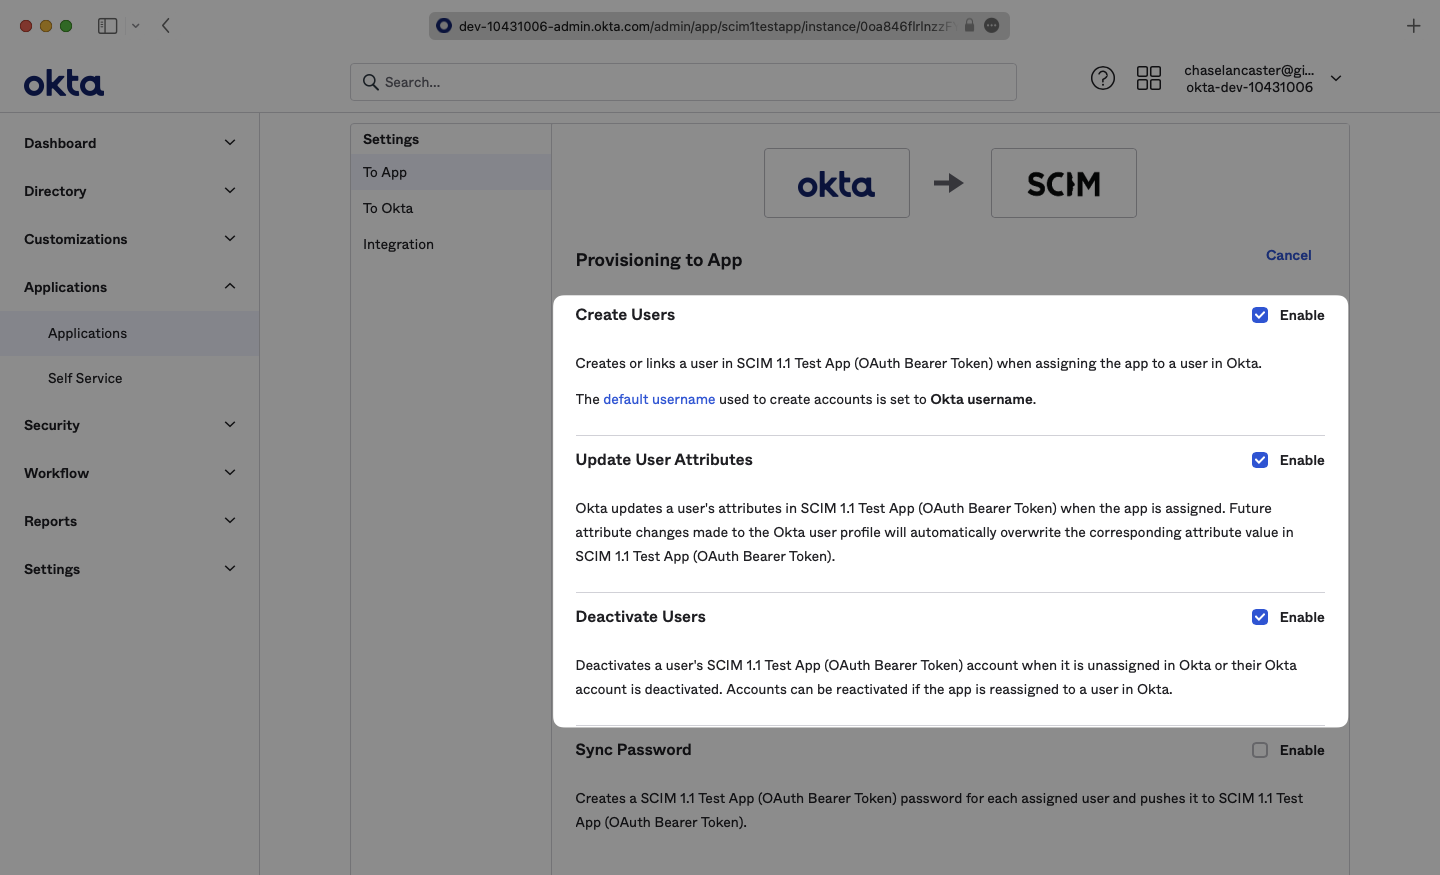 A screenshot showing where to enable "Create Users", "Update User Attributes", and "Deactivate Users" in the "To App" tab in Okta.